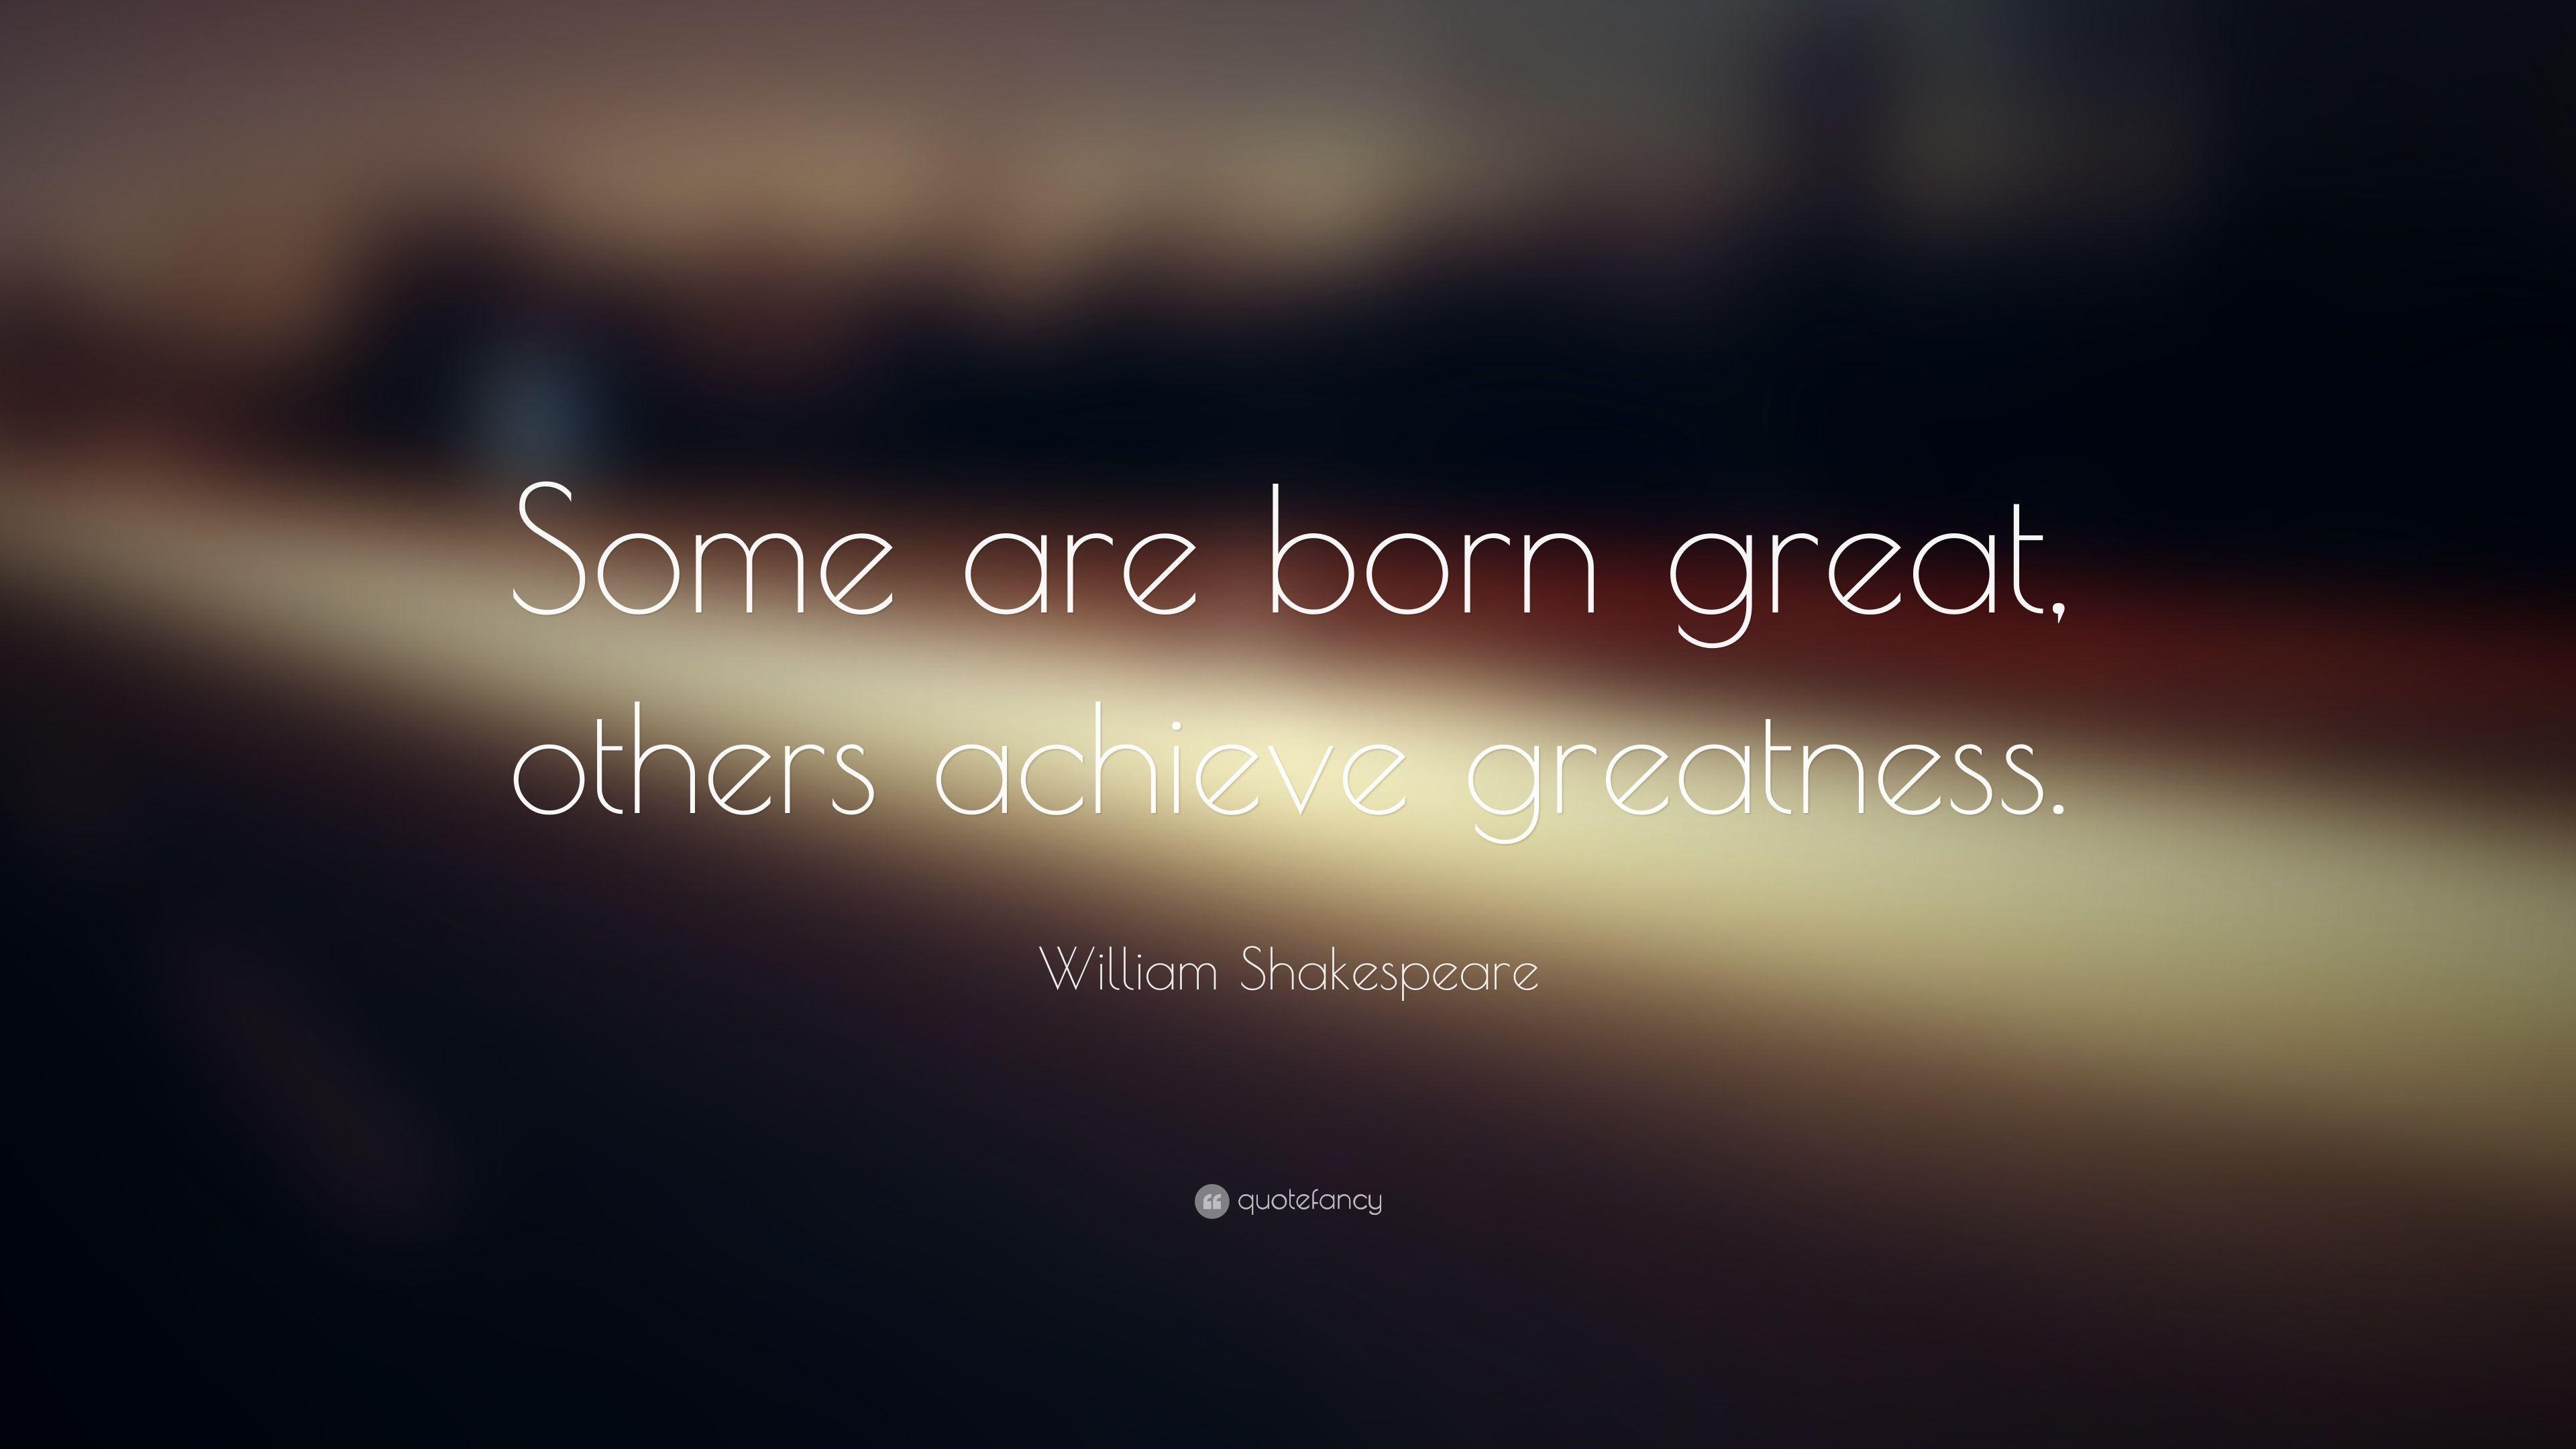 William Shakespeare Quote: “Some are born great, others achieve